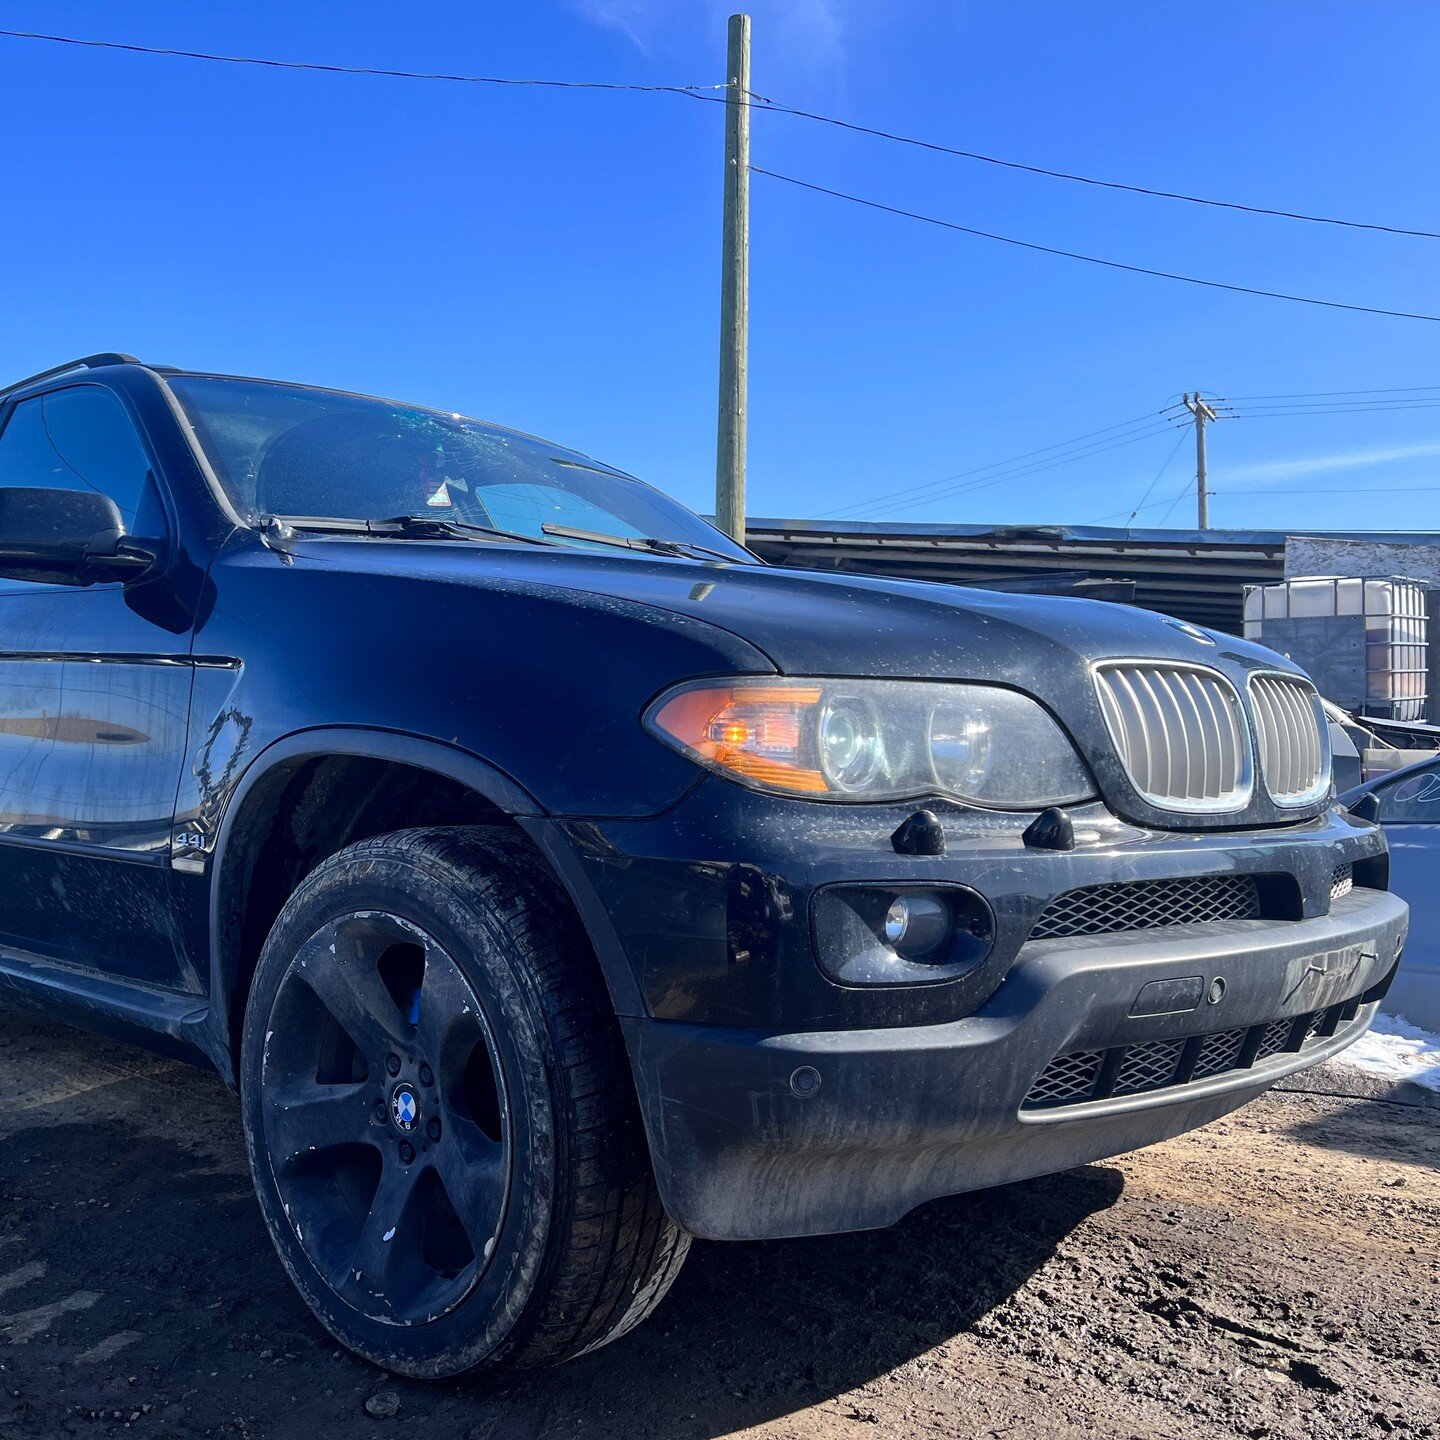 2005 BMW X5 4.4I *FOR PARTS* - 4WD, 6 SPEED AUTOMATIC TRANSMISSION, 8 CYCLINDER , BLACK, KMS:234073, VIN:5UXFB53585LV17740

We offer contactless delivery and are more than willing to accommodate your needs.
Why pick your part when we pull it for you!